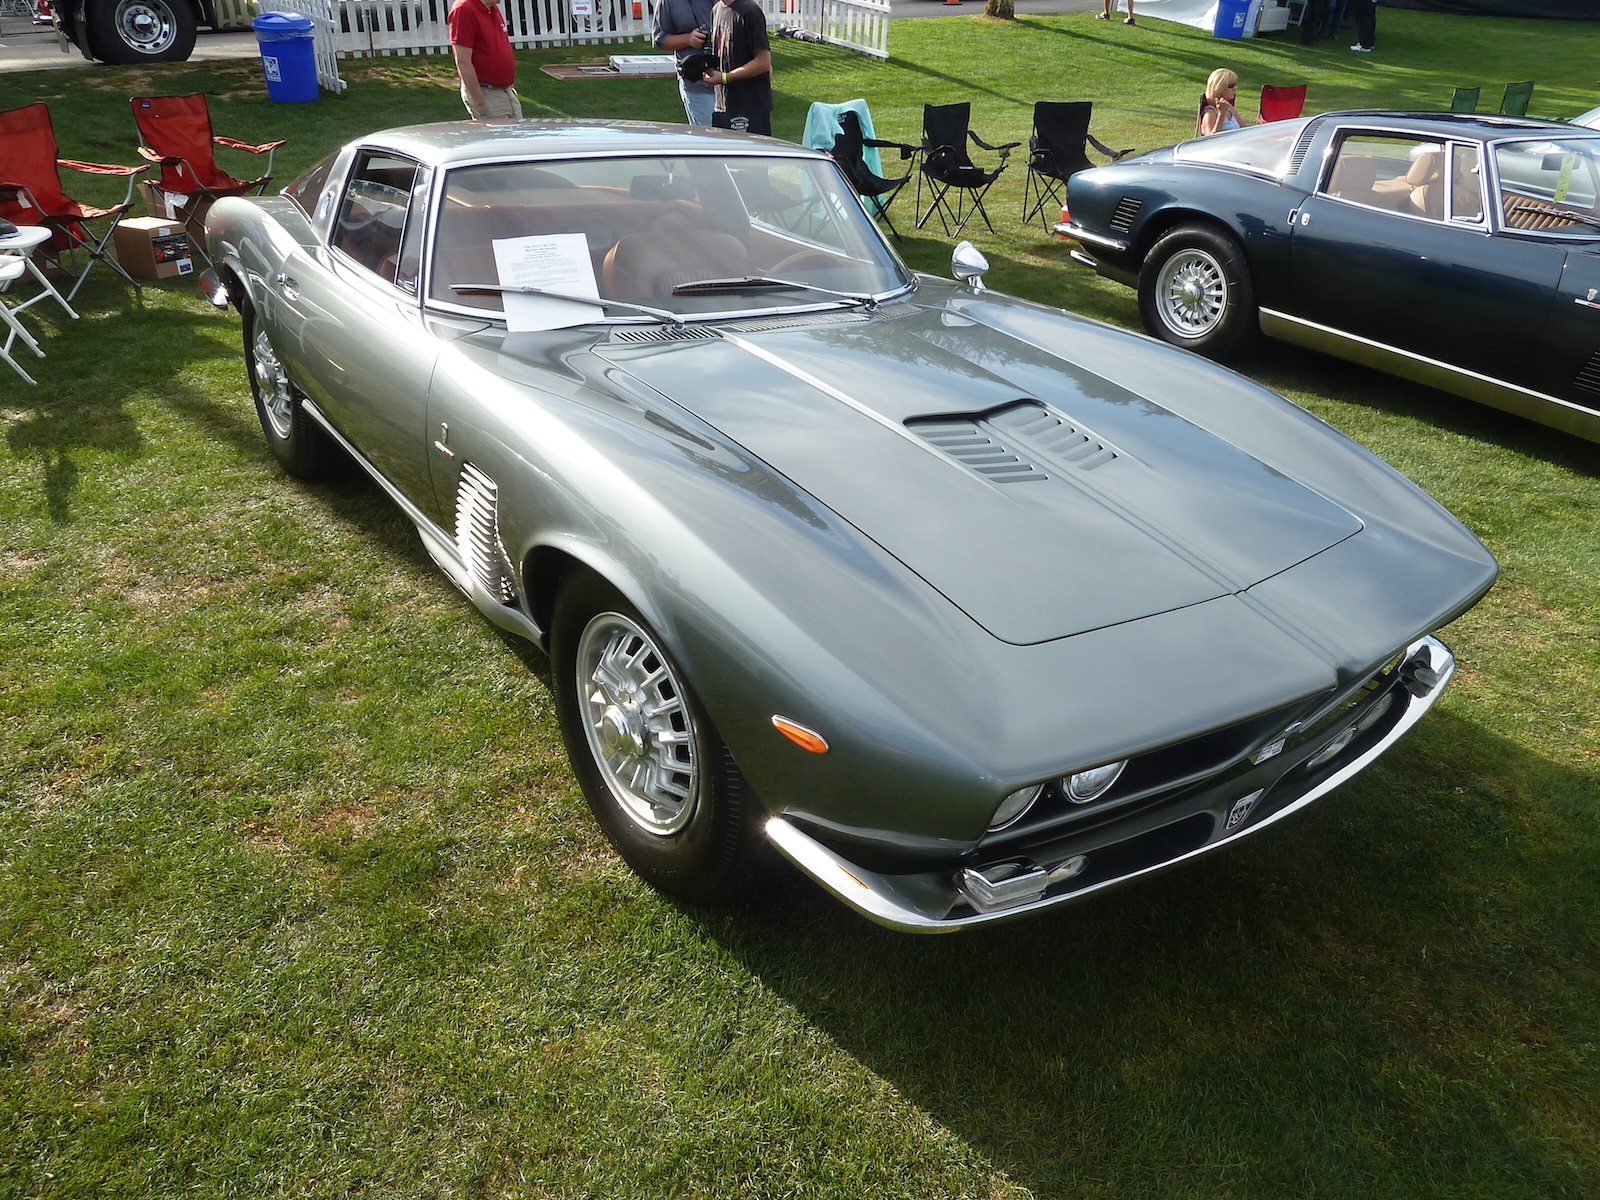 Iso Grifo - A Brief History On Its 50th Anniversary